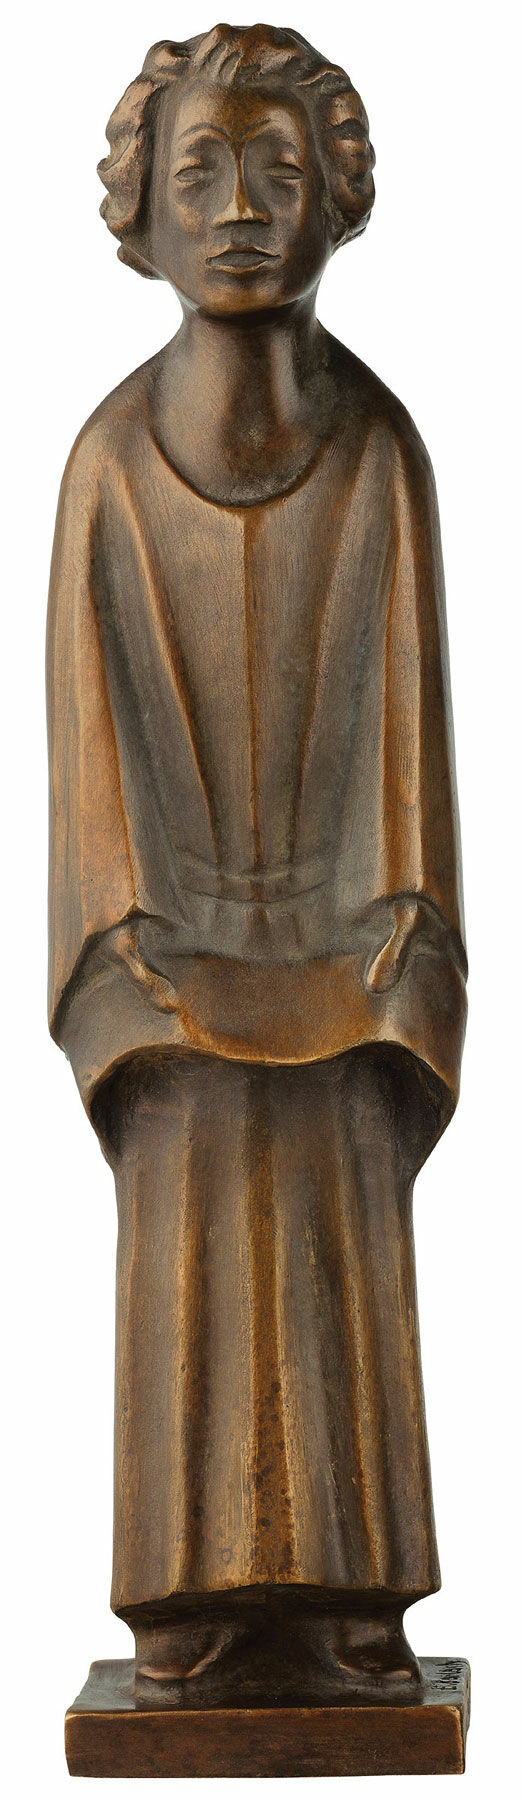 Sculpture "The Singer (Singing Monastery Student)" (1931), reduction in bronze by Ernst Barlach